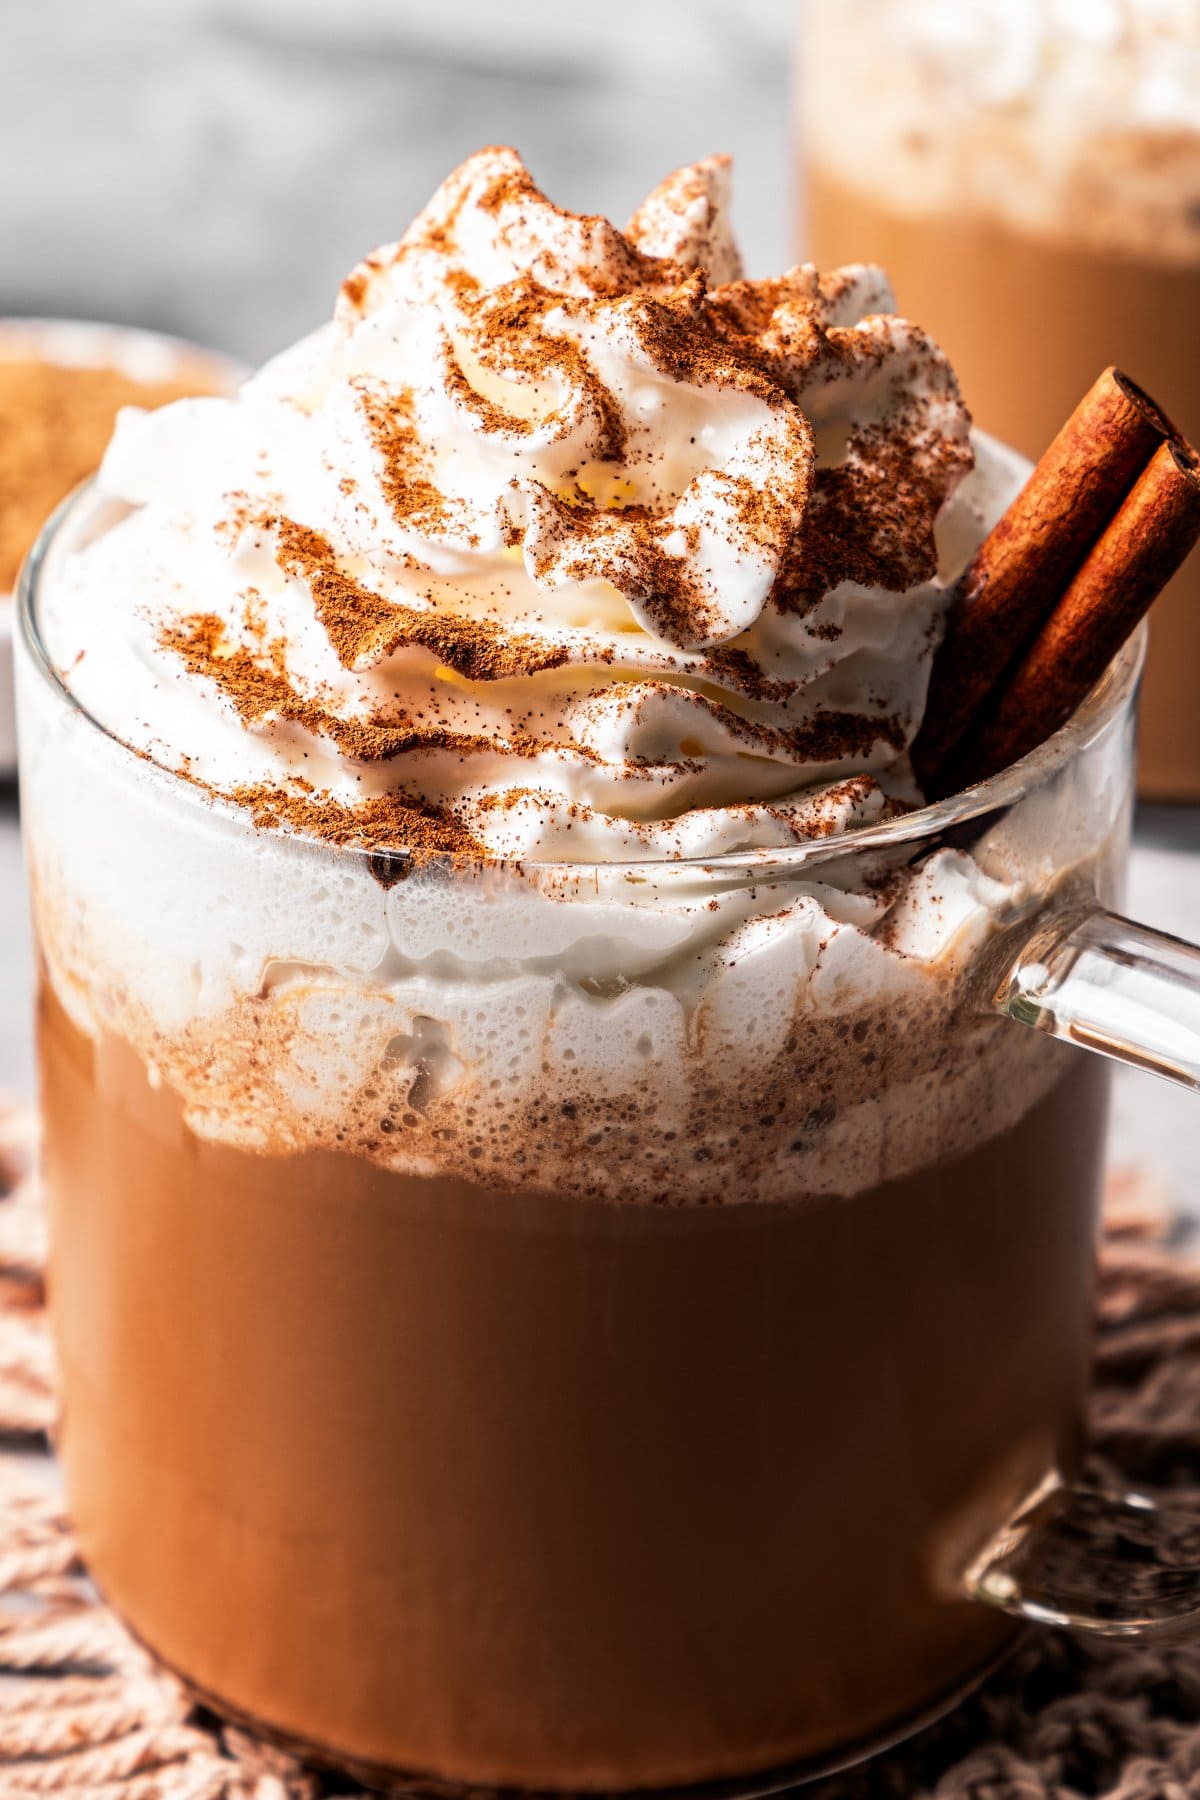 A cinnamon dolce latte in a glass mug garnished with whipped cream and a cinnamon stick, and dusted with ground cinnamon.